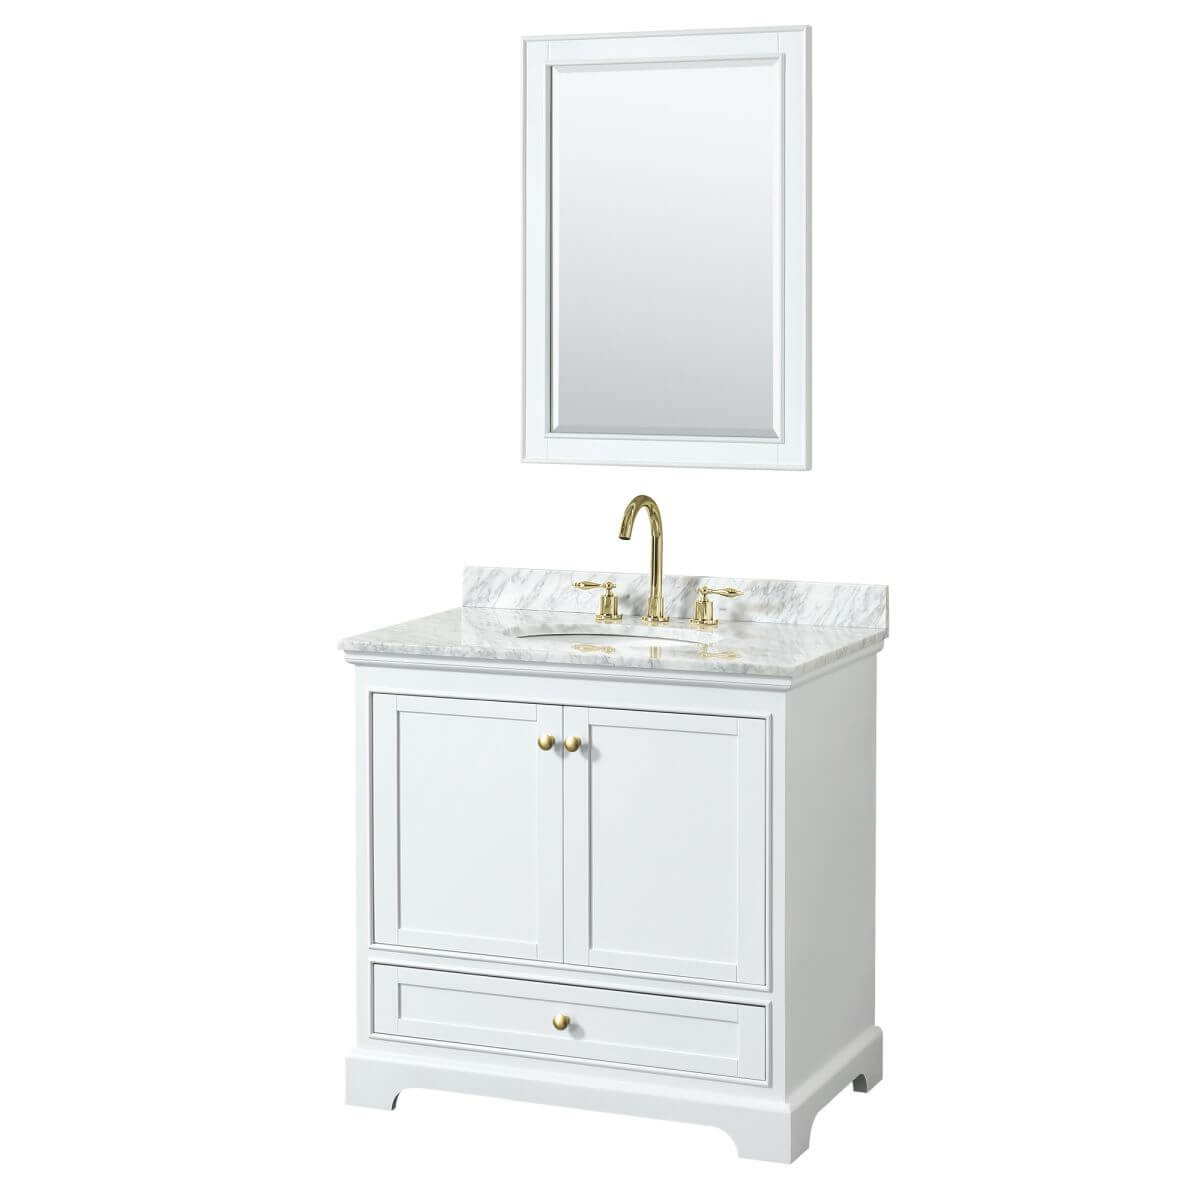 Wyndham Collection Deborah 36 inch Single Bathroom Vanity in White with White Carrara Marble Countertop, Undermount Oval Sink, Brushed Gold Trim and 24 inch Mirror - WCS202036SWGCMUNOM24